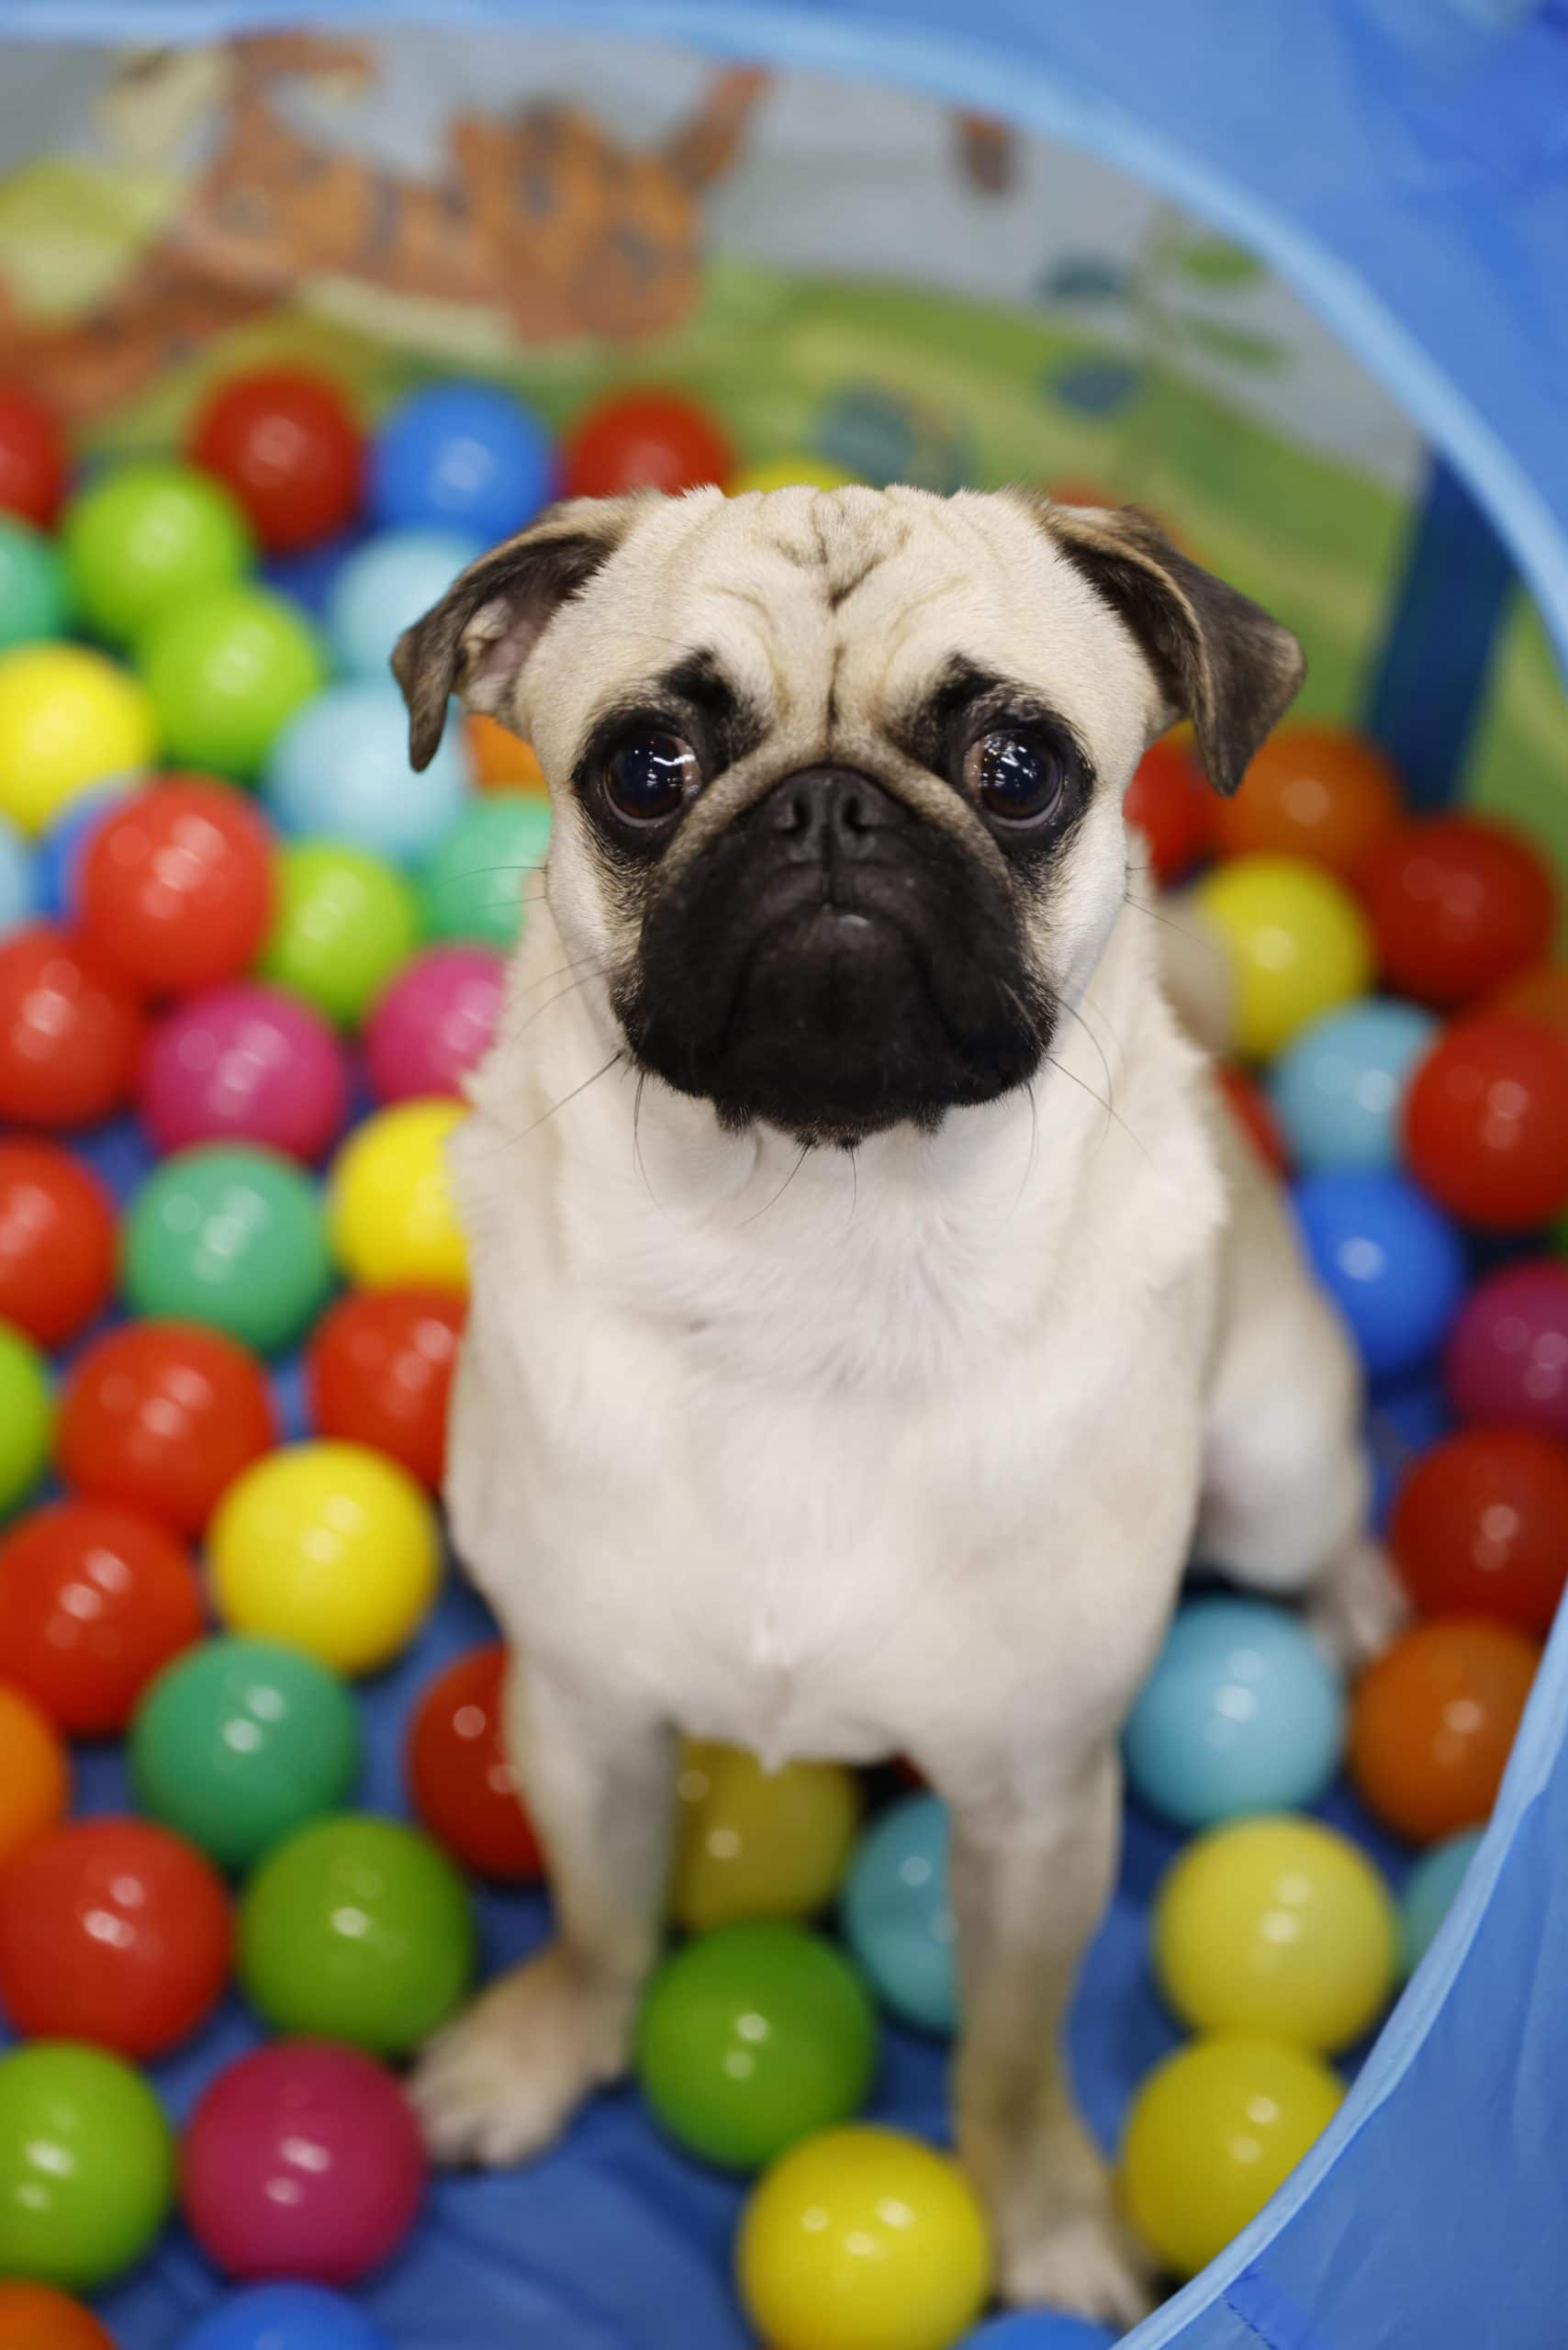 Doggy in ballpit